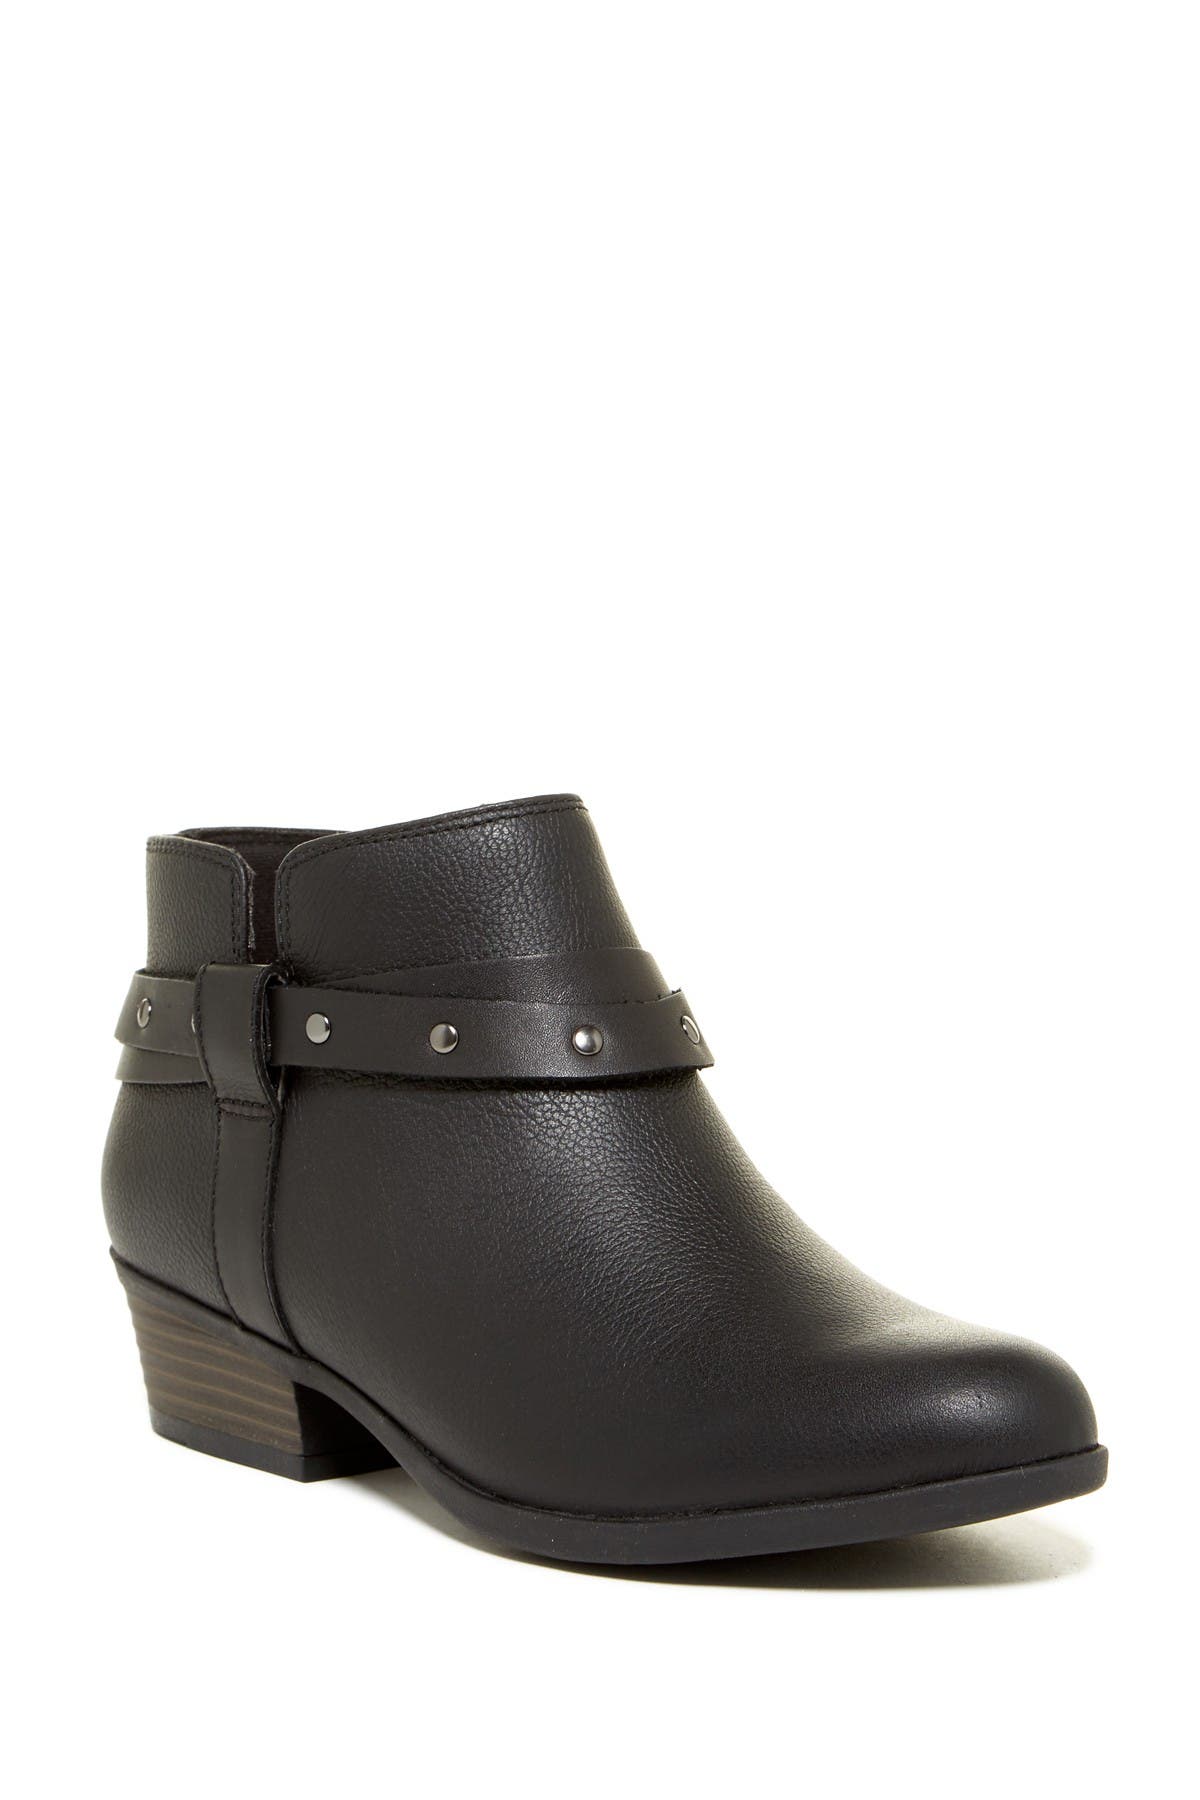 Clarks | Addiy Zoie Ankle Boot - Wide 